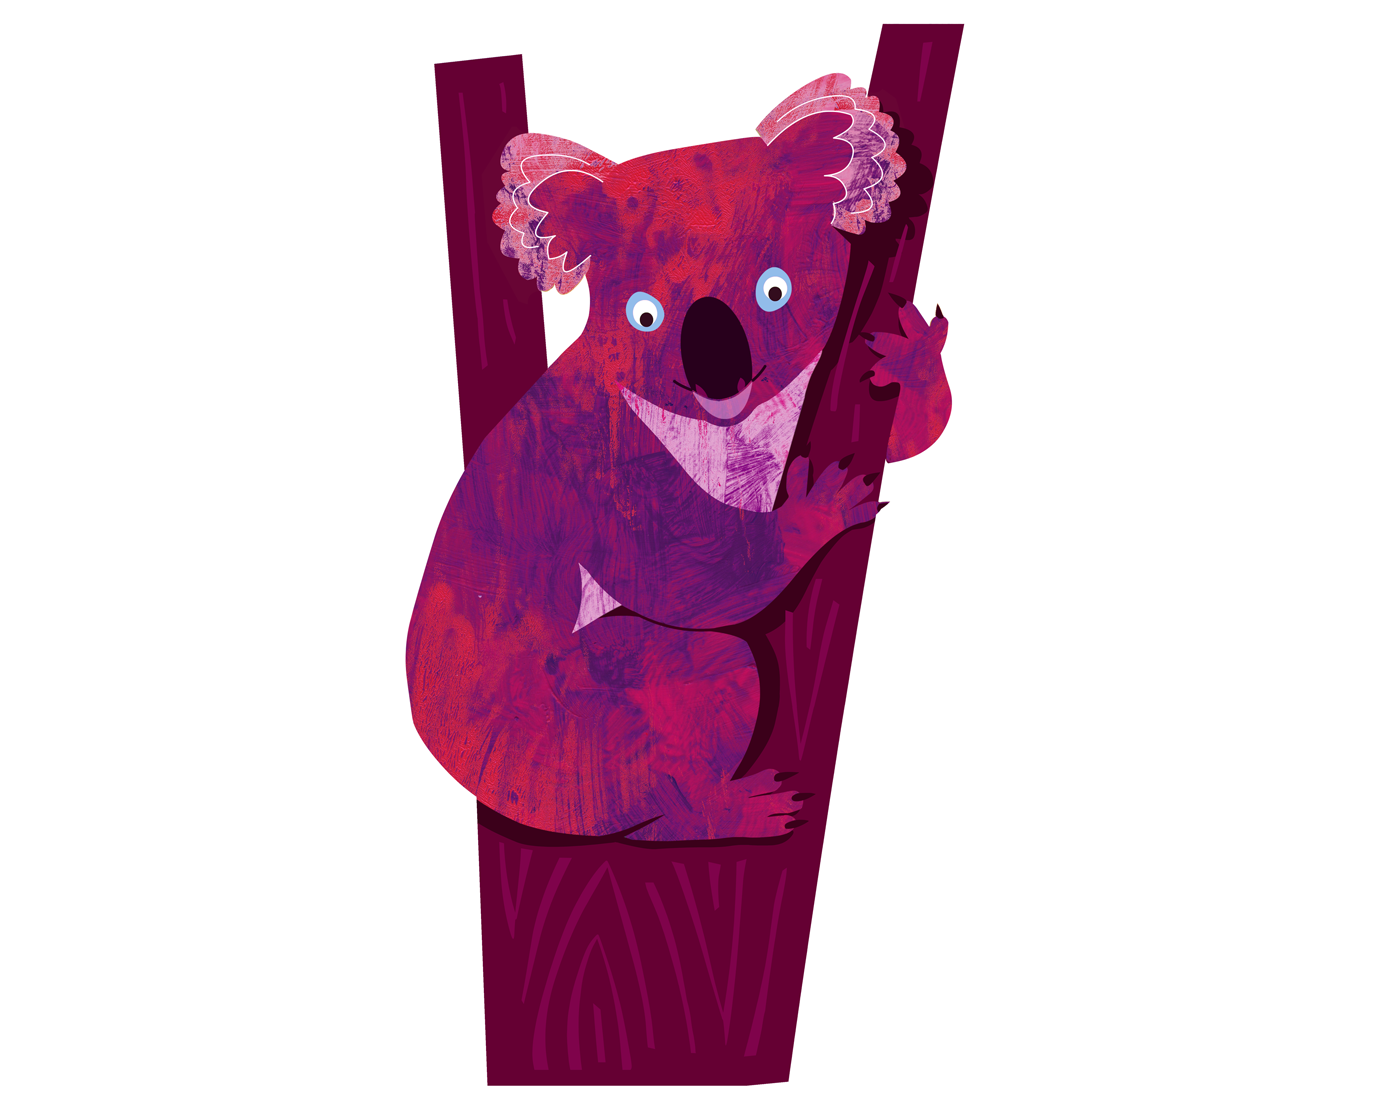 Koala with a painted texture.